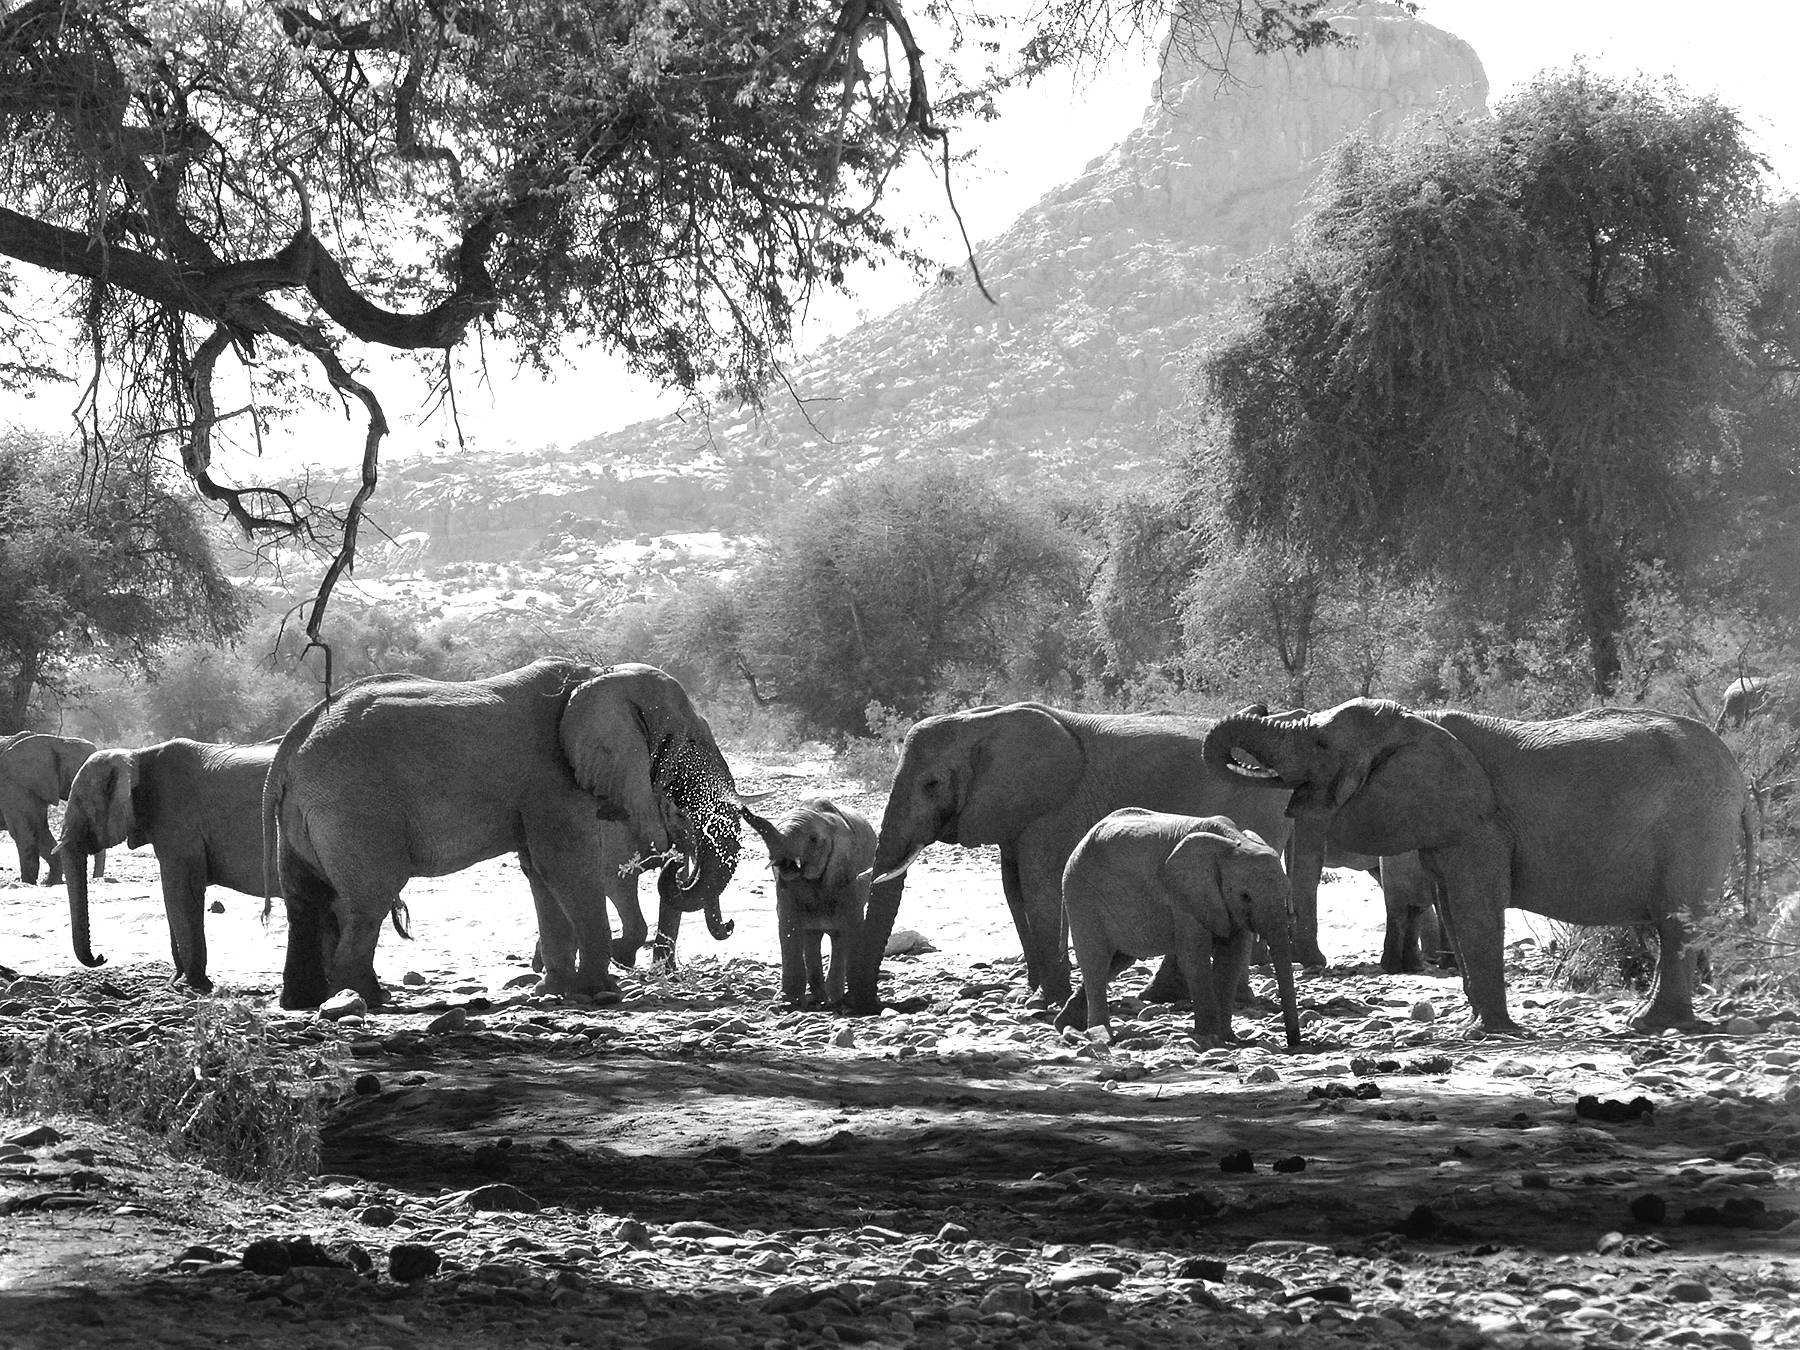 South Whidbey resident Donald J. Miller has spent four decades photographing elephants in Africa and Asia. This is a herd of desert elephants that are rebounding in Namibia because of successful anti-poaching efforts. Photo by Donald J. Miller